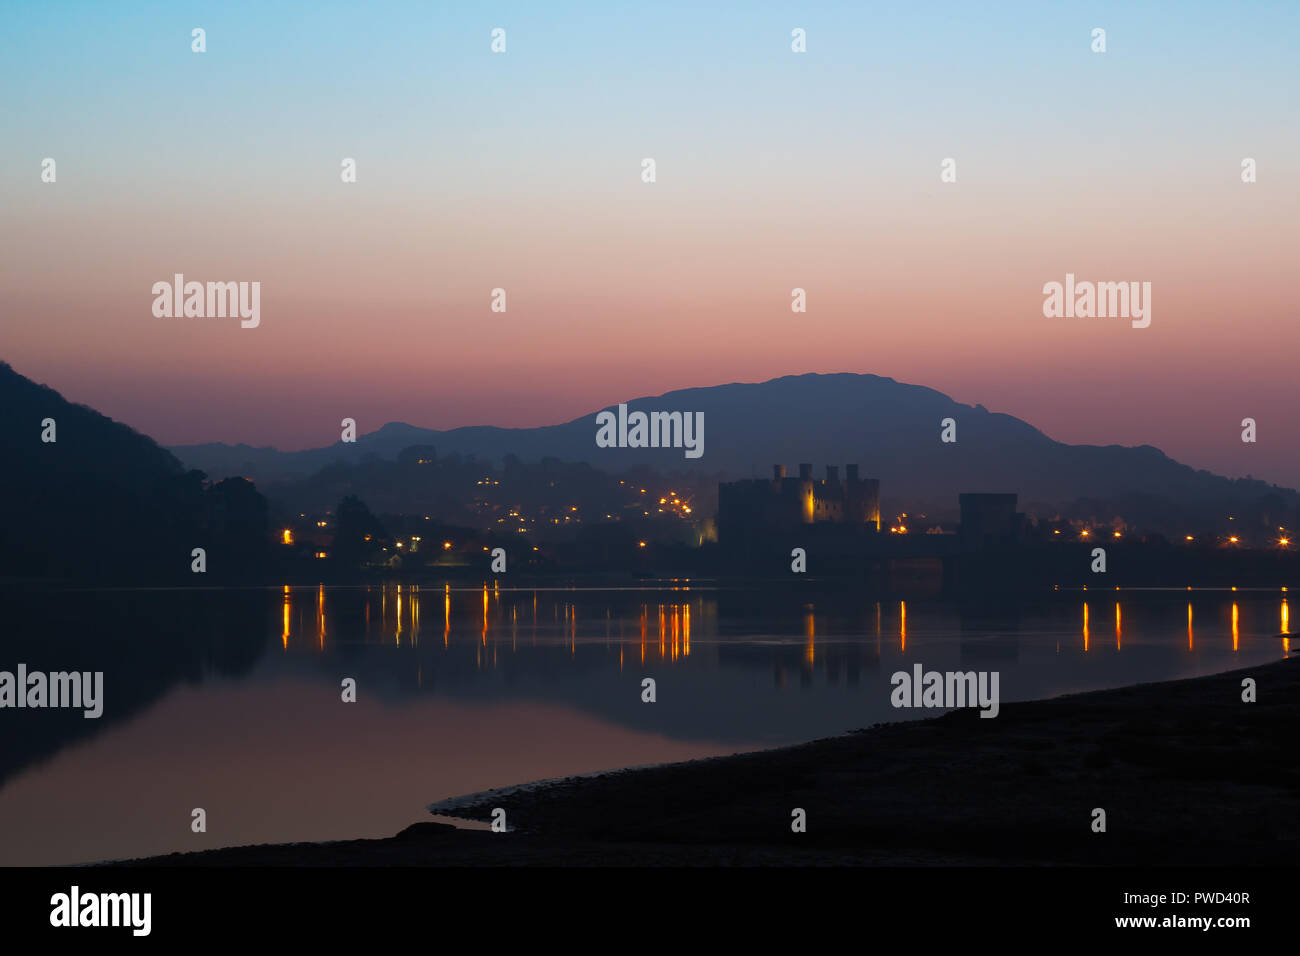 Conwy Castle lit up at night, almost in silhouette, picturesque scenic light reflections in harbour water. Dramatic sunset, twilight sky. Stock Photo